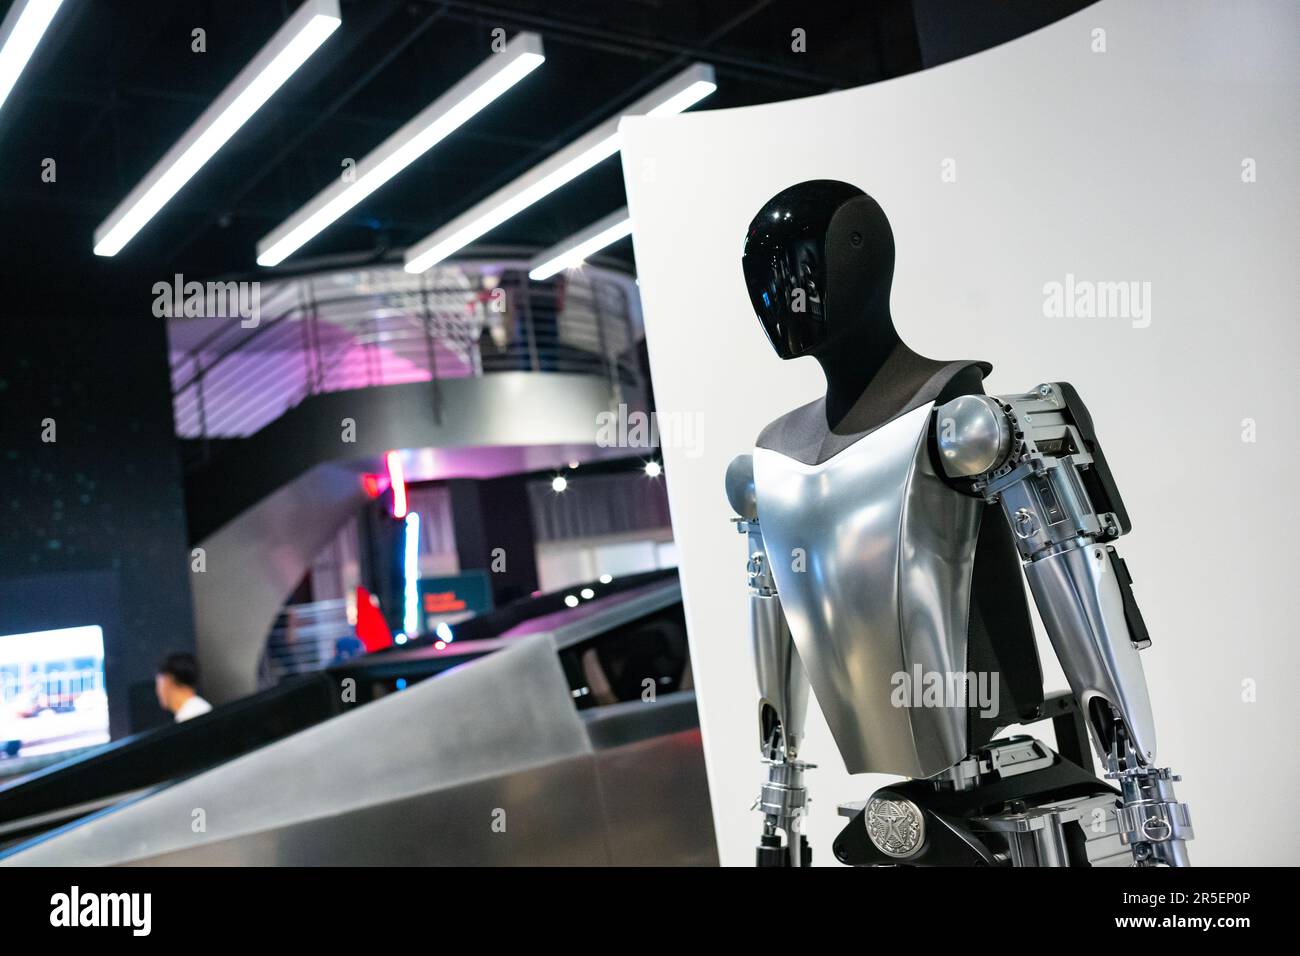 Los Angeles, CA, USA - Dec 26, 2022: Optimus, also known as Tesla Bot, shown here at the Petersens Automotive Museum, was announced at the company's A Stock Photo